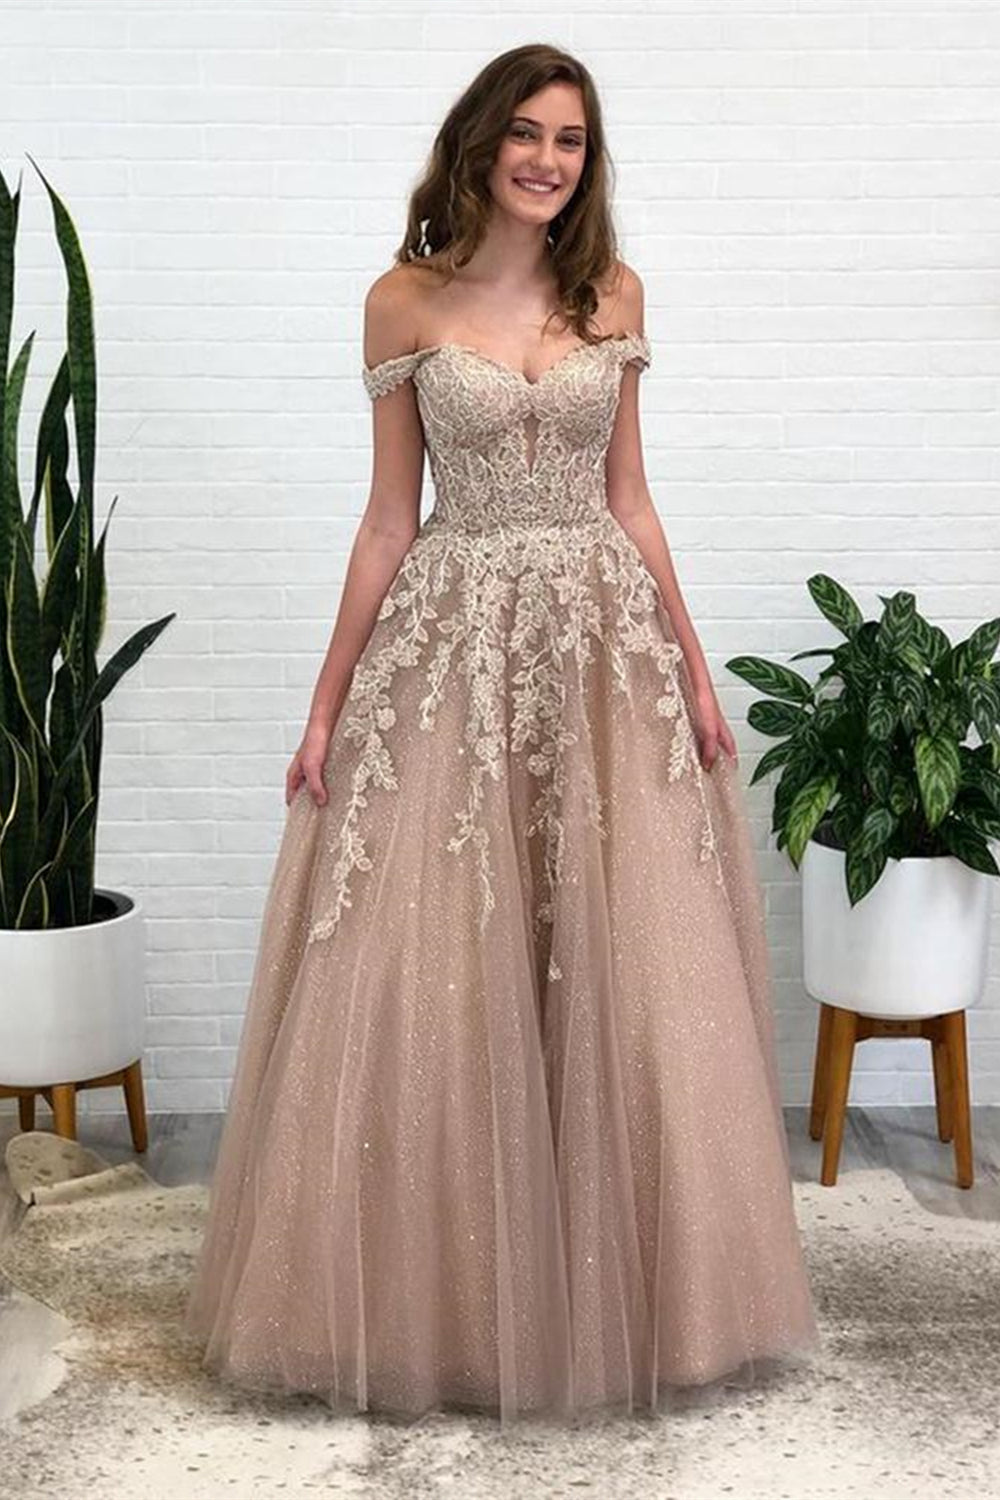 tsunami Grabar tragedia Shiny Off Shoulder Champagne Lace Long Prom Dresses, Champagne Lace Fo –  Eip Collection